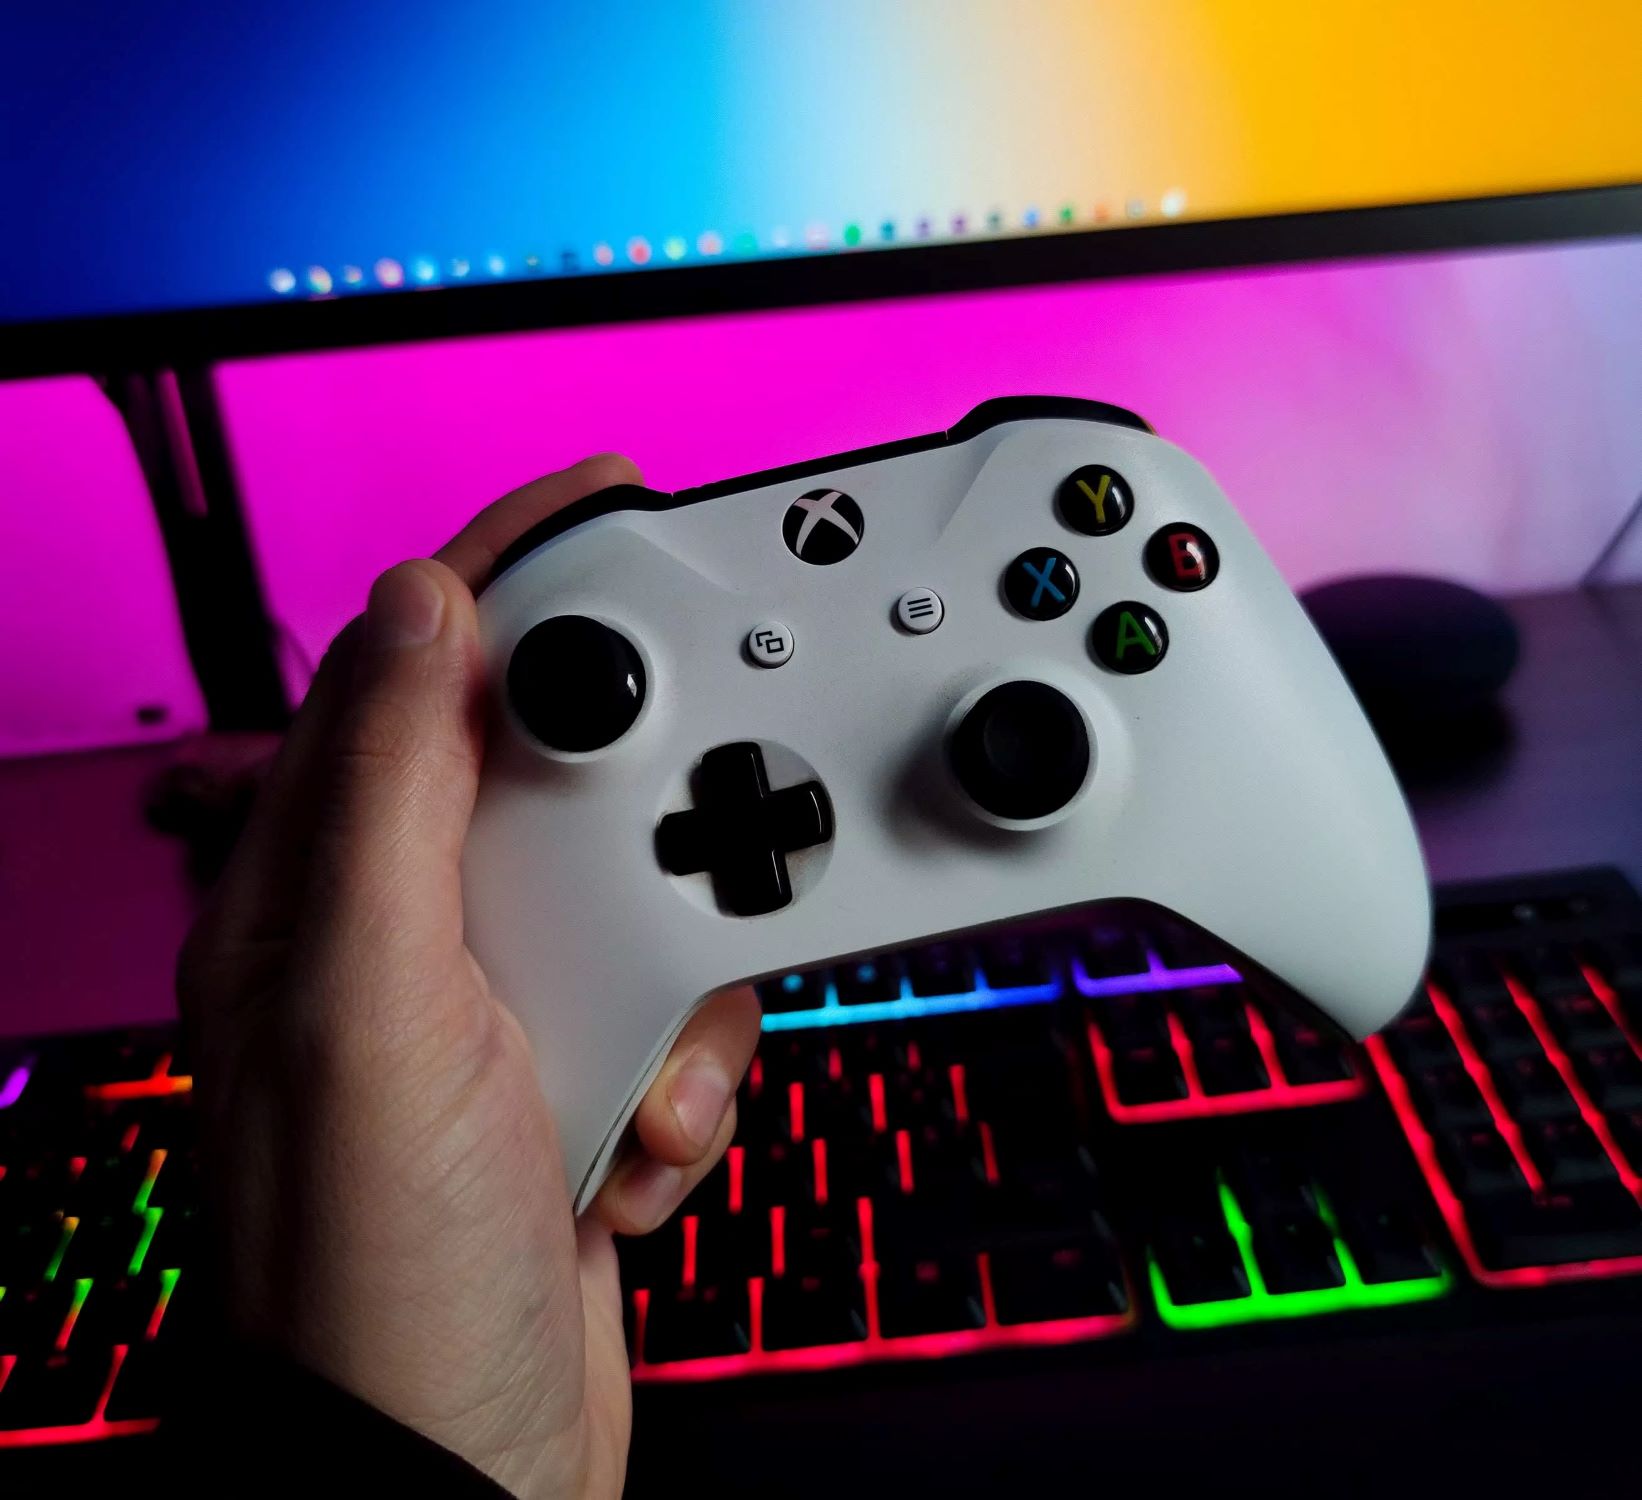 How To Configure Video Game Controller On Windows 10